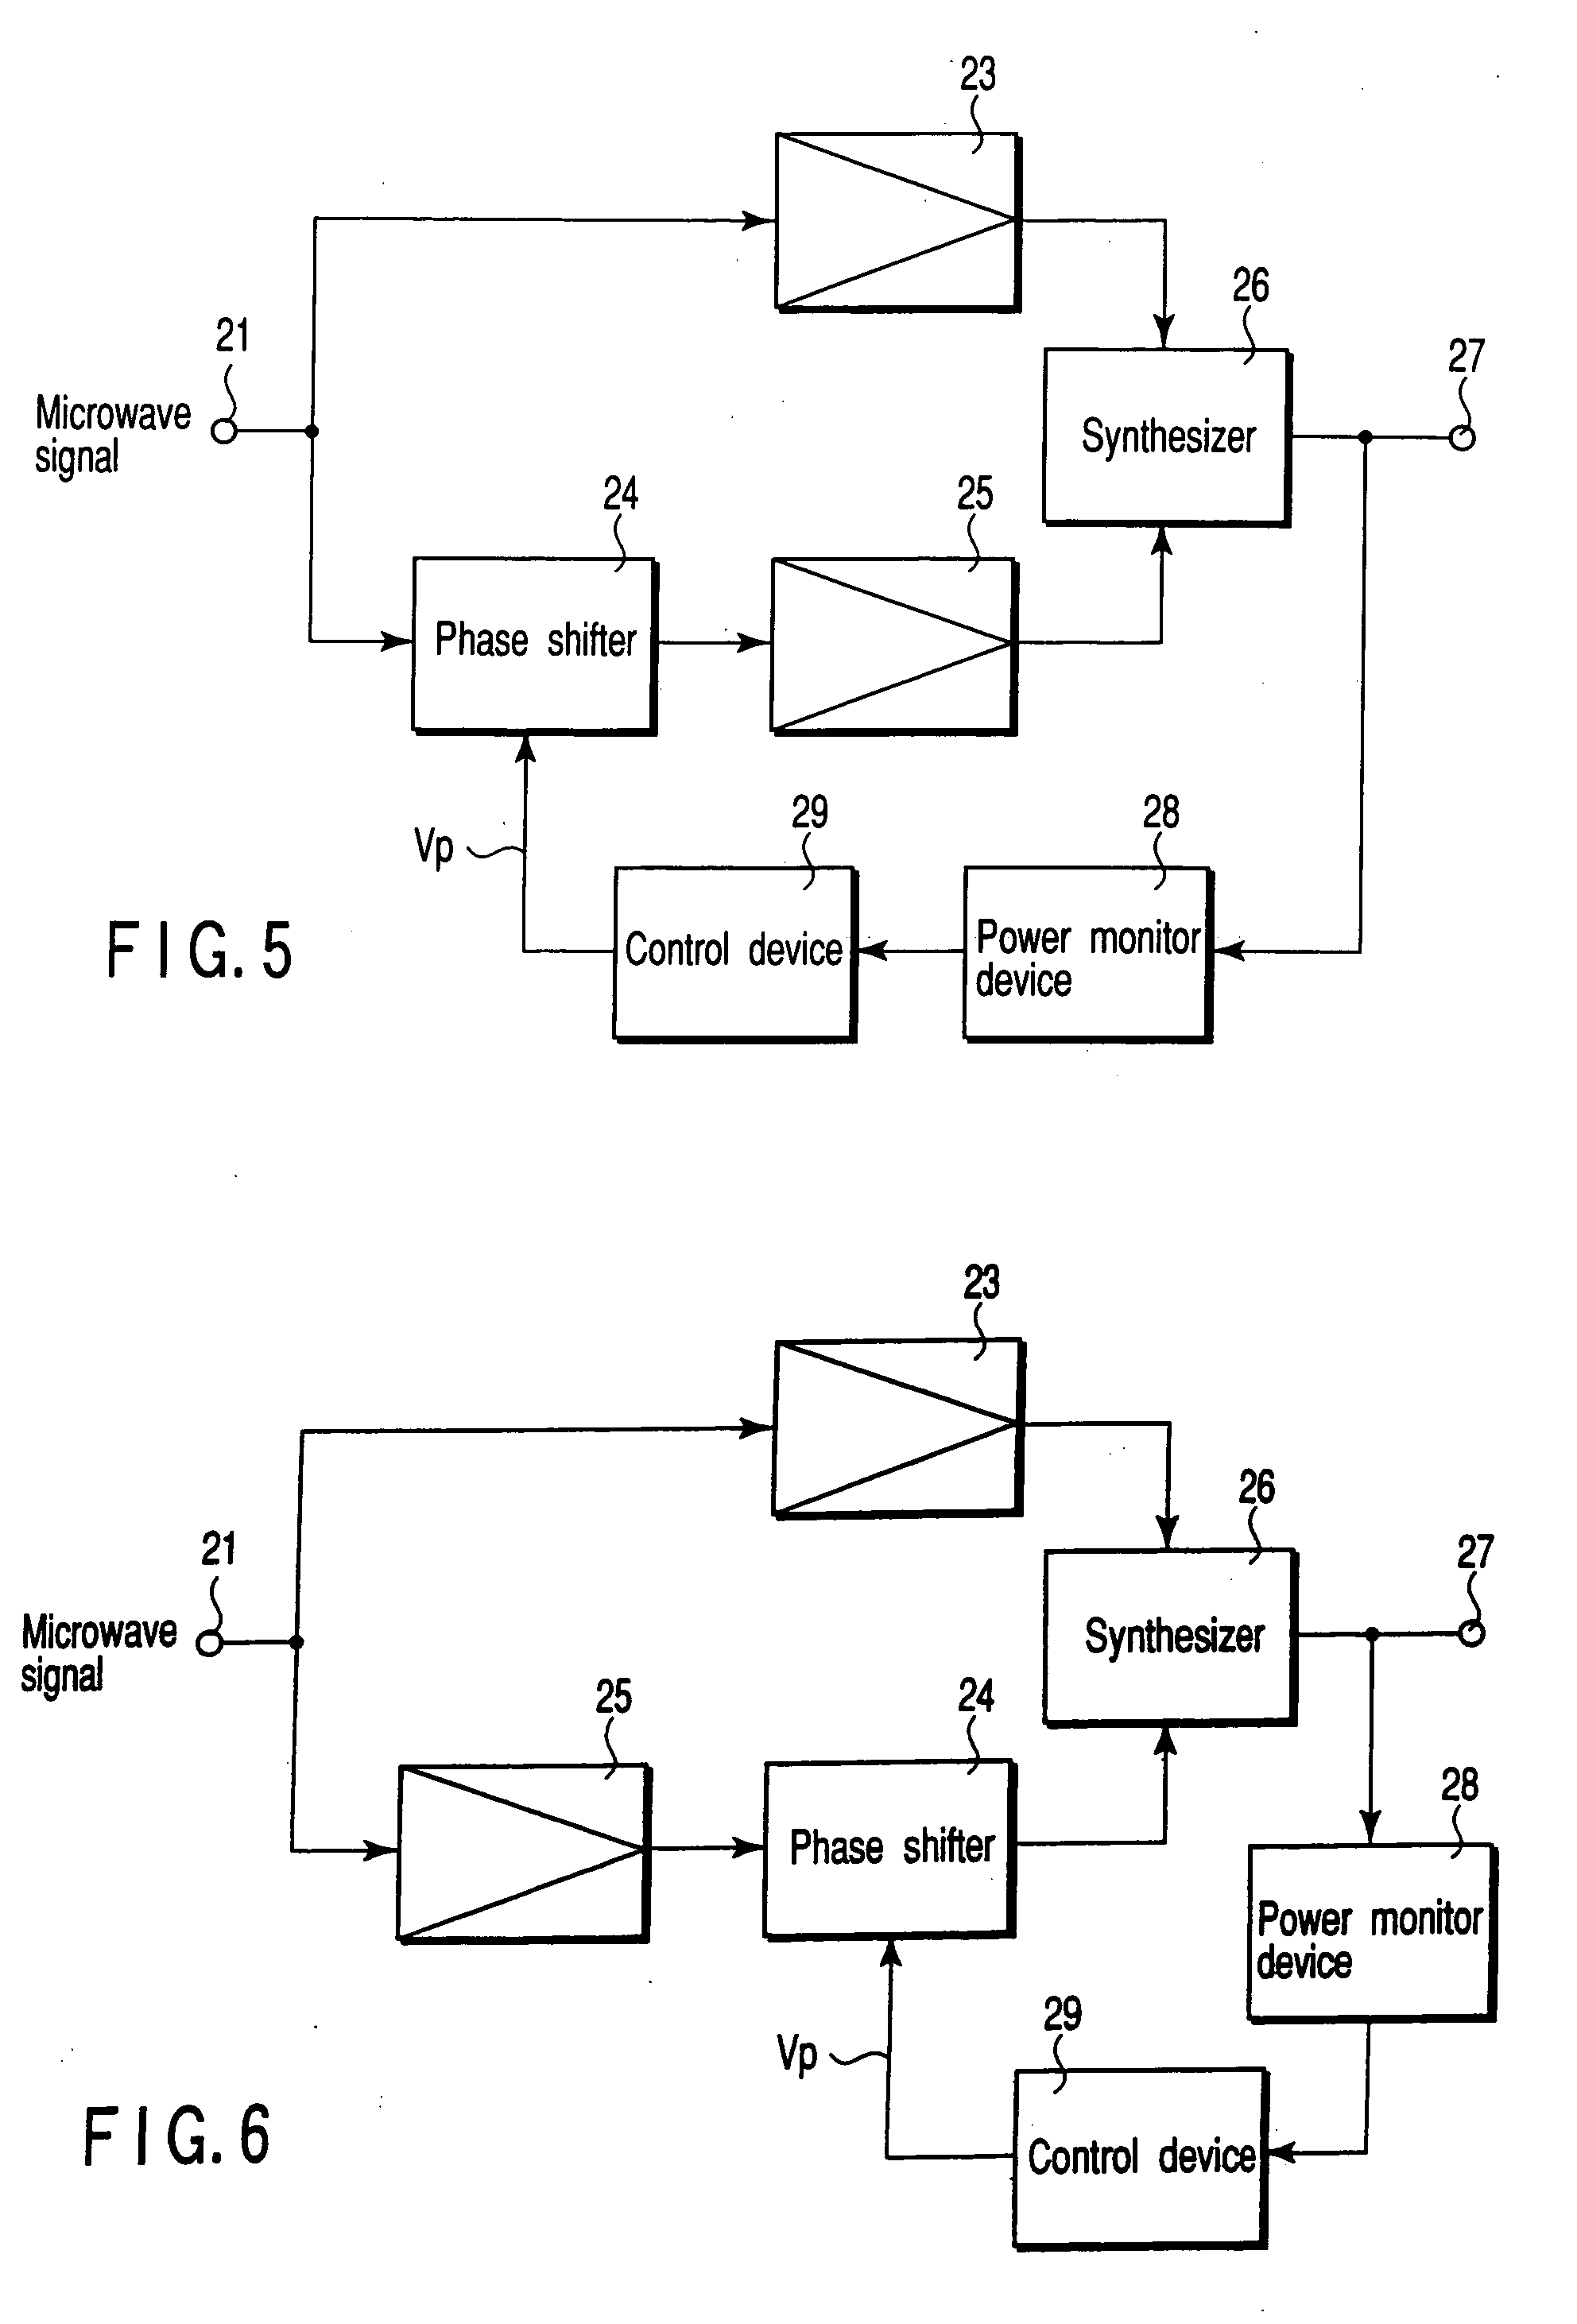 Microwave phase shifter and power amplifier